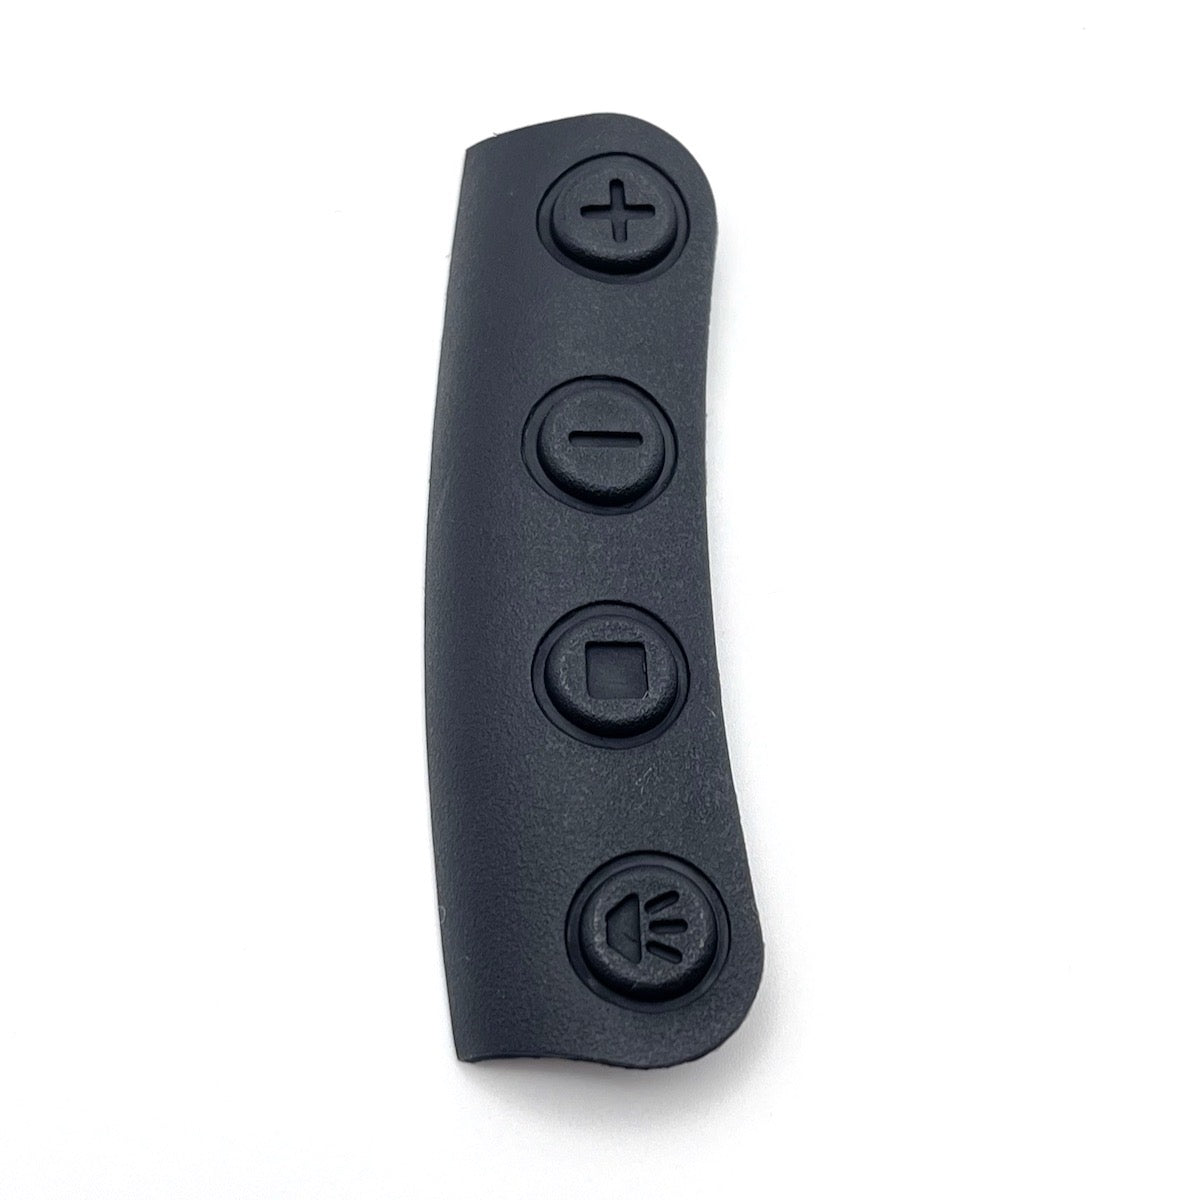 New Rubber buttons pad (left side) for Garmin Zumo 450 500 550 part repair zoom